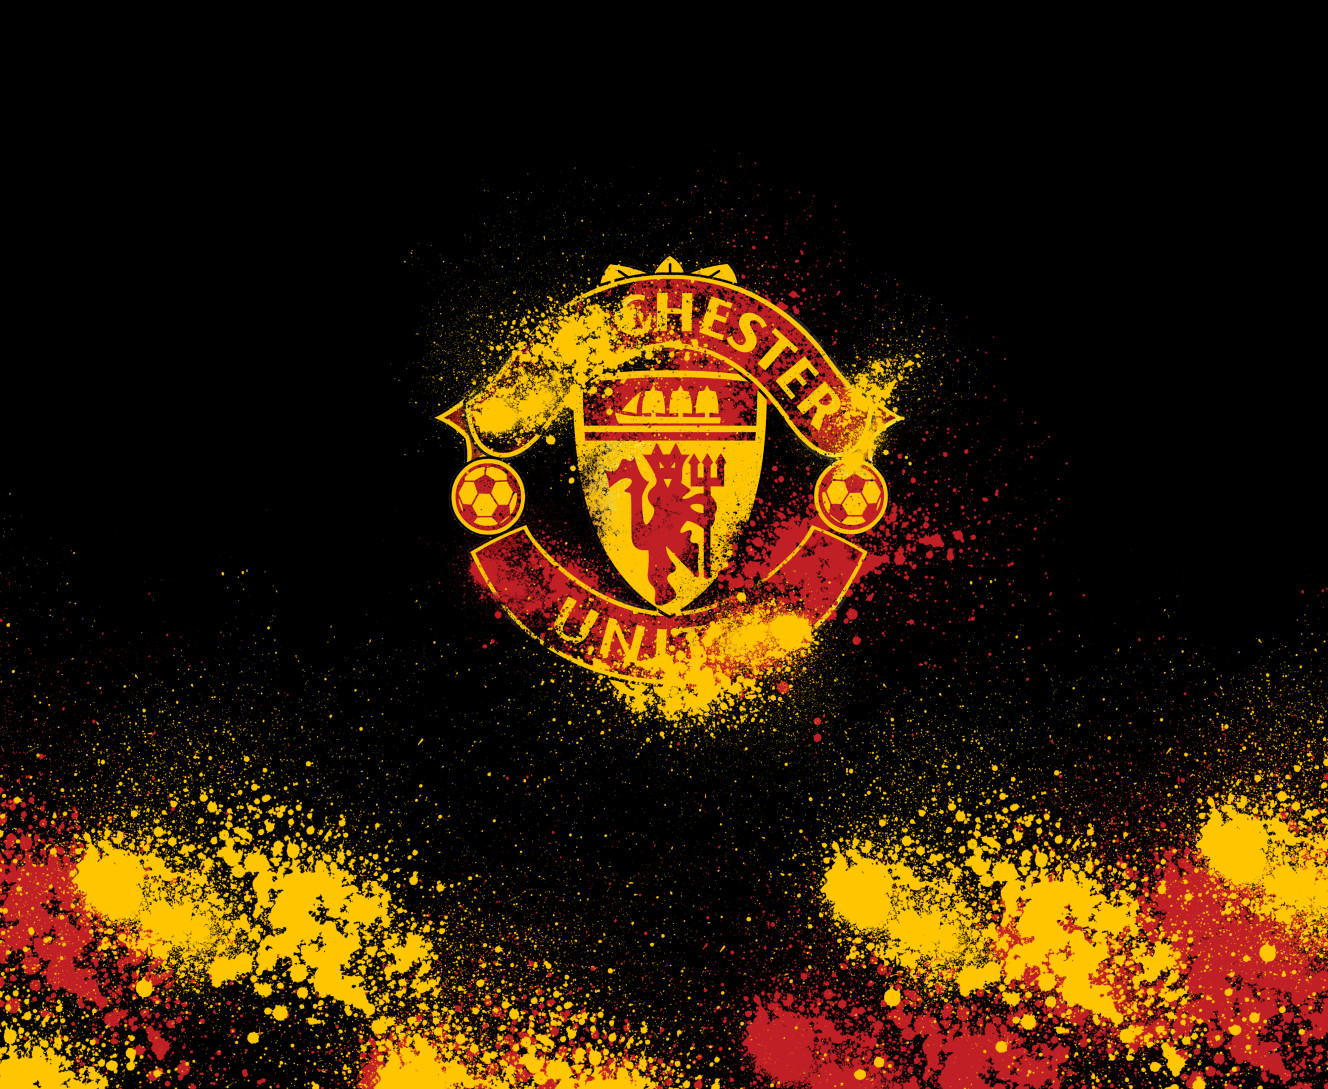 manchester united [2]